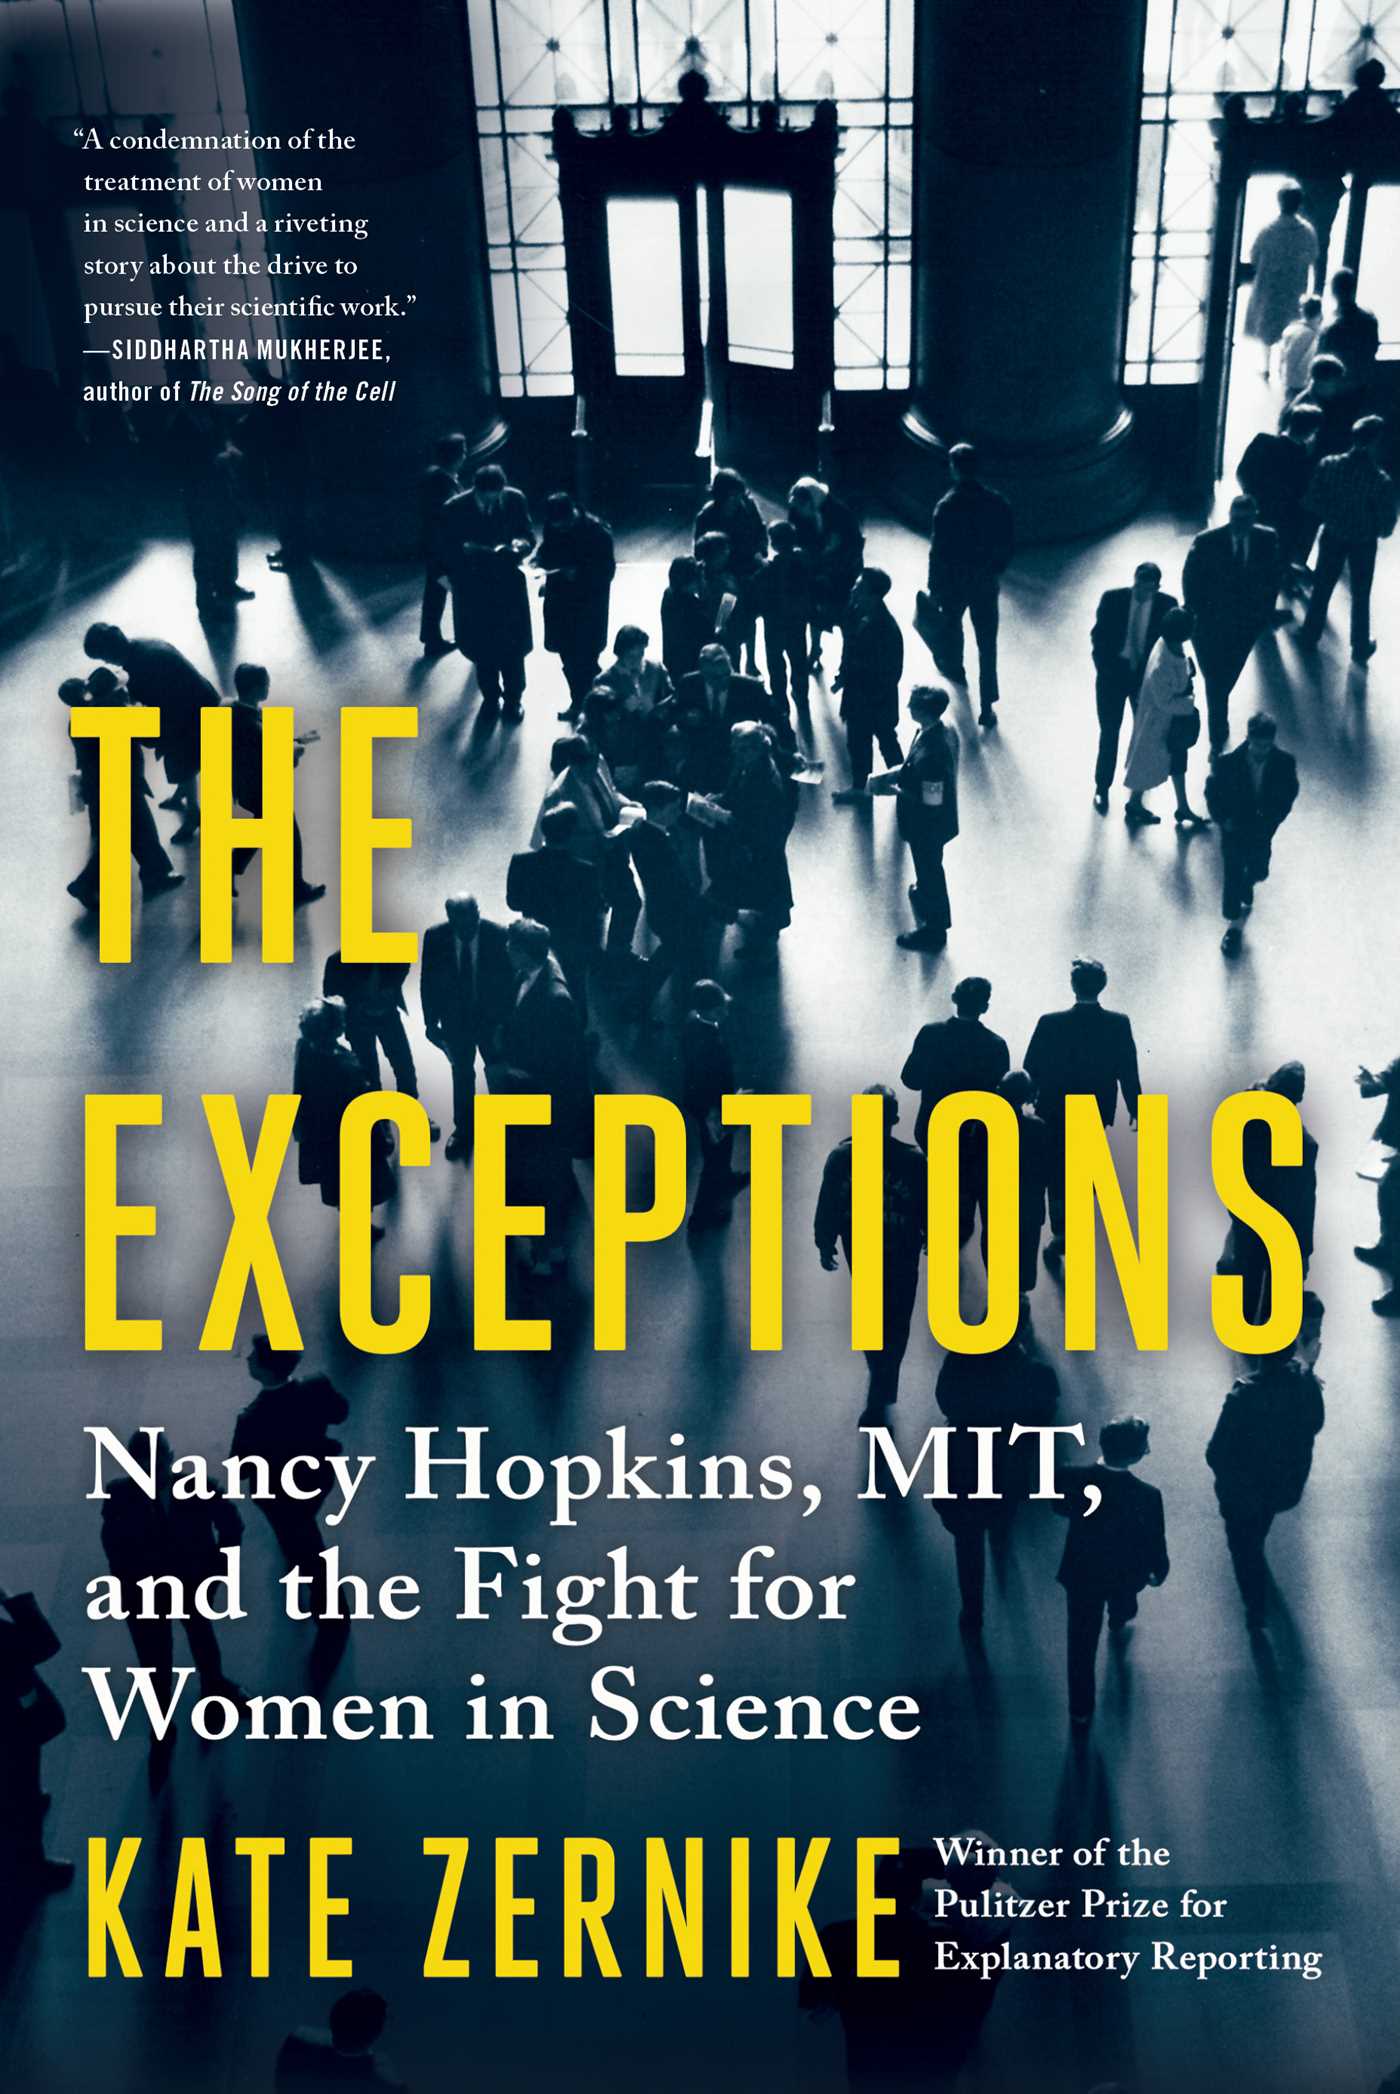 Image for "The Exceptions"